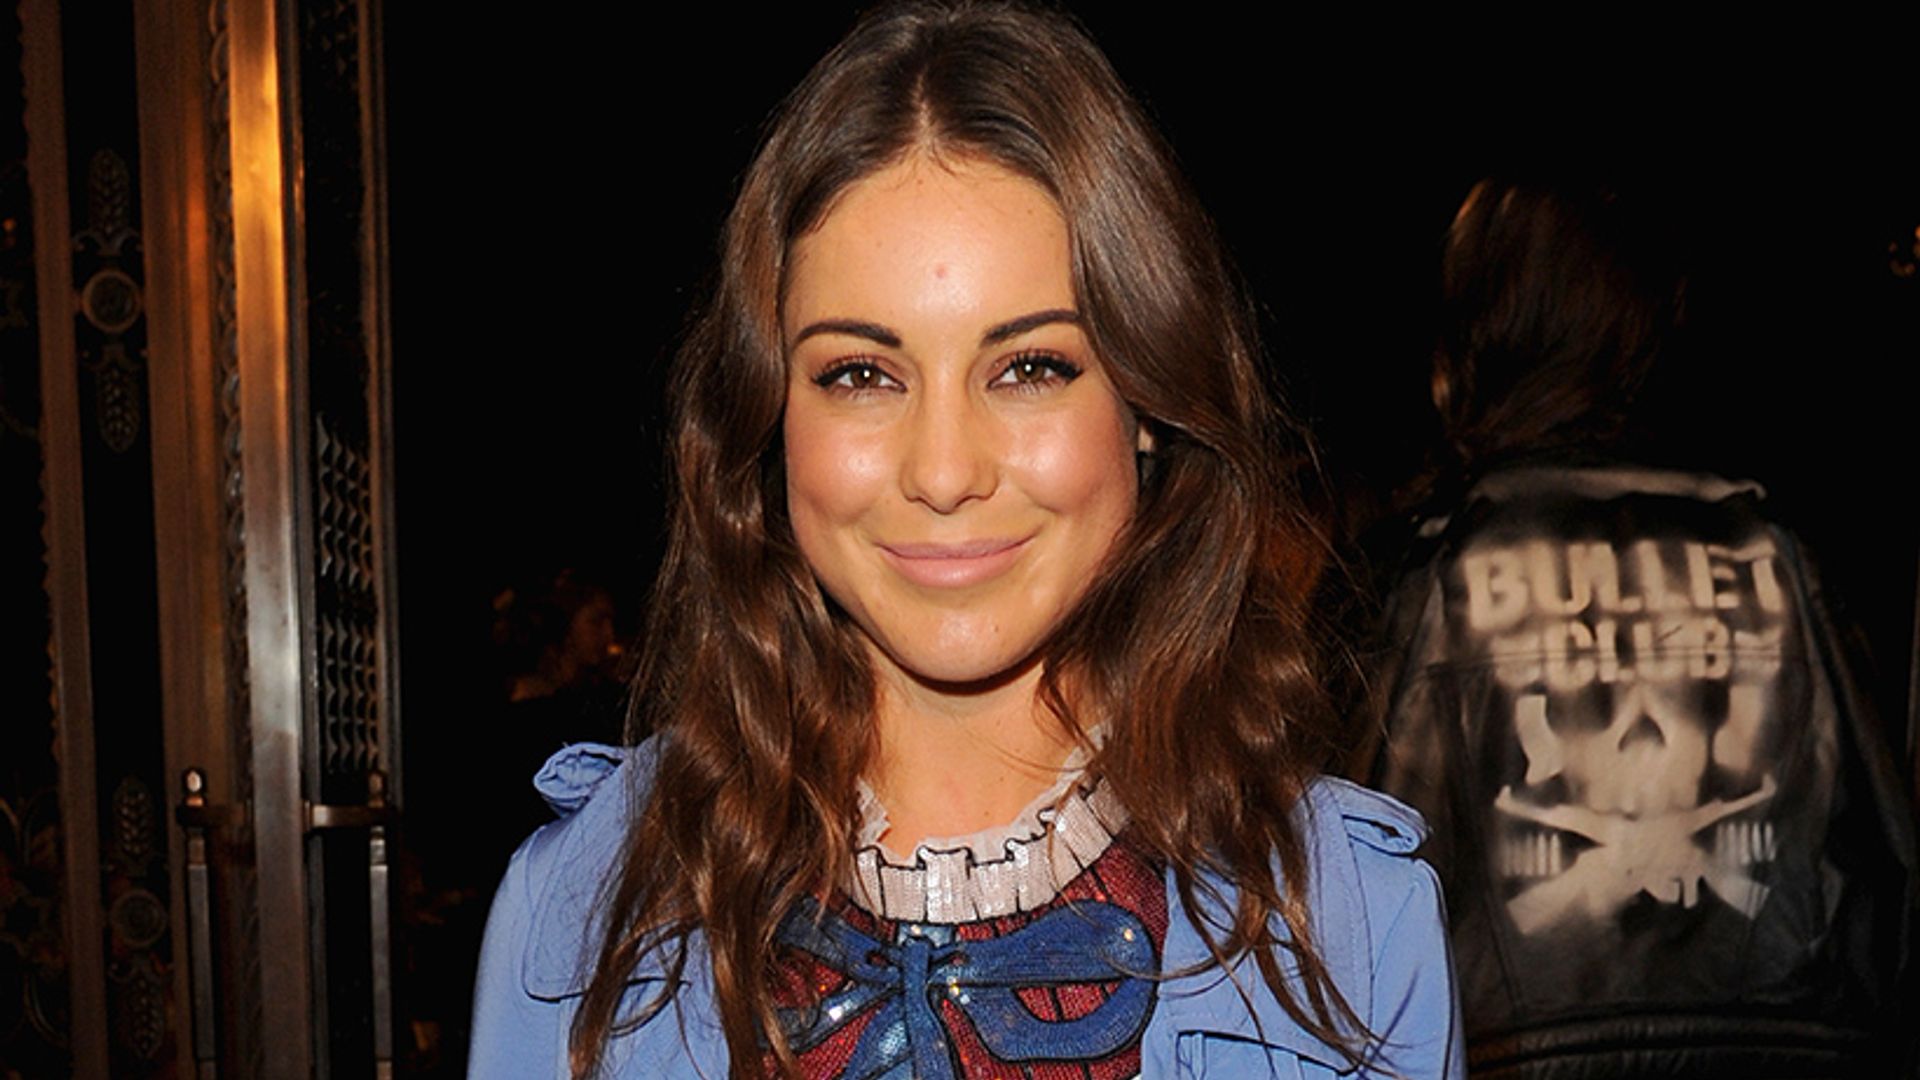 Made in Chelsea's Louise Thompson gives us a sneak peek into this season